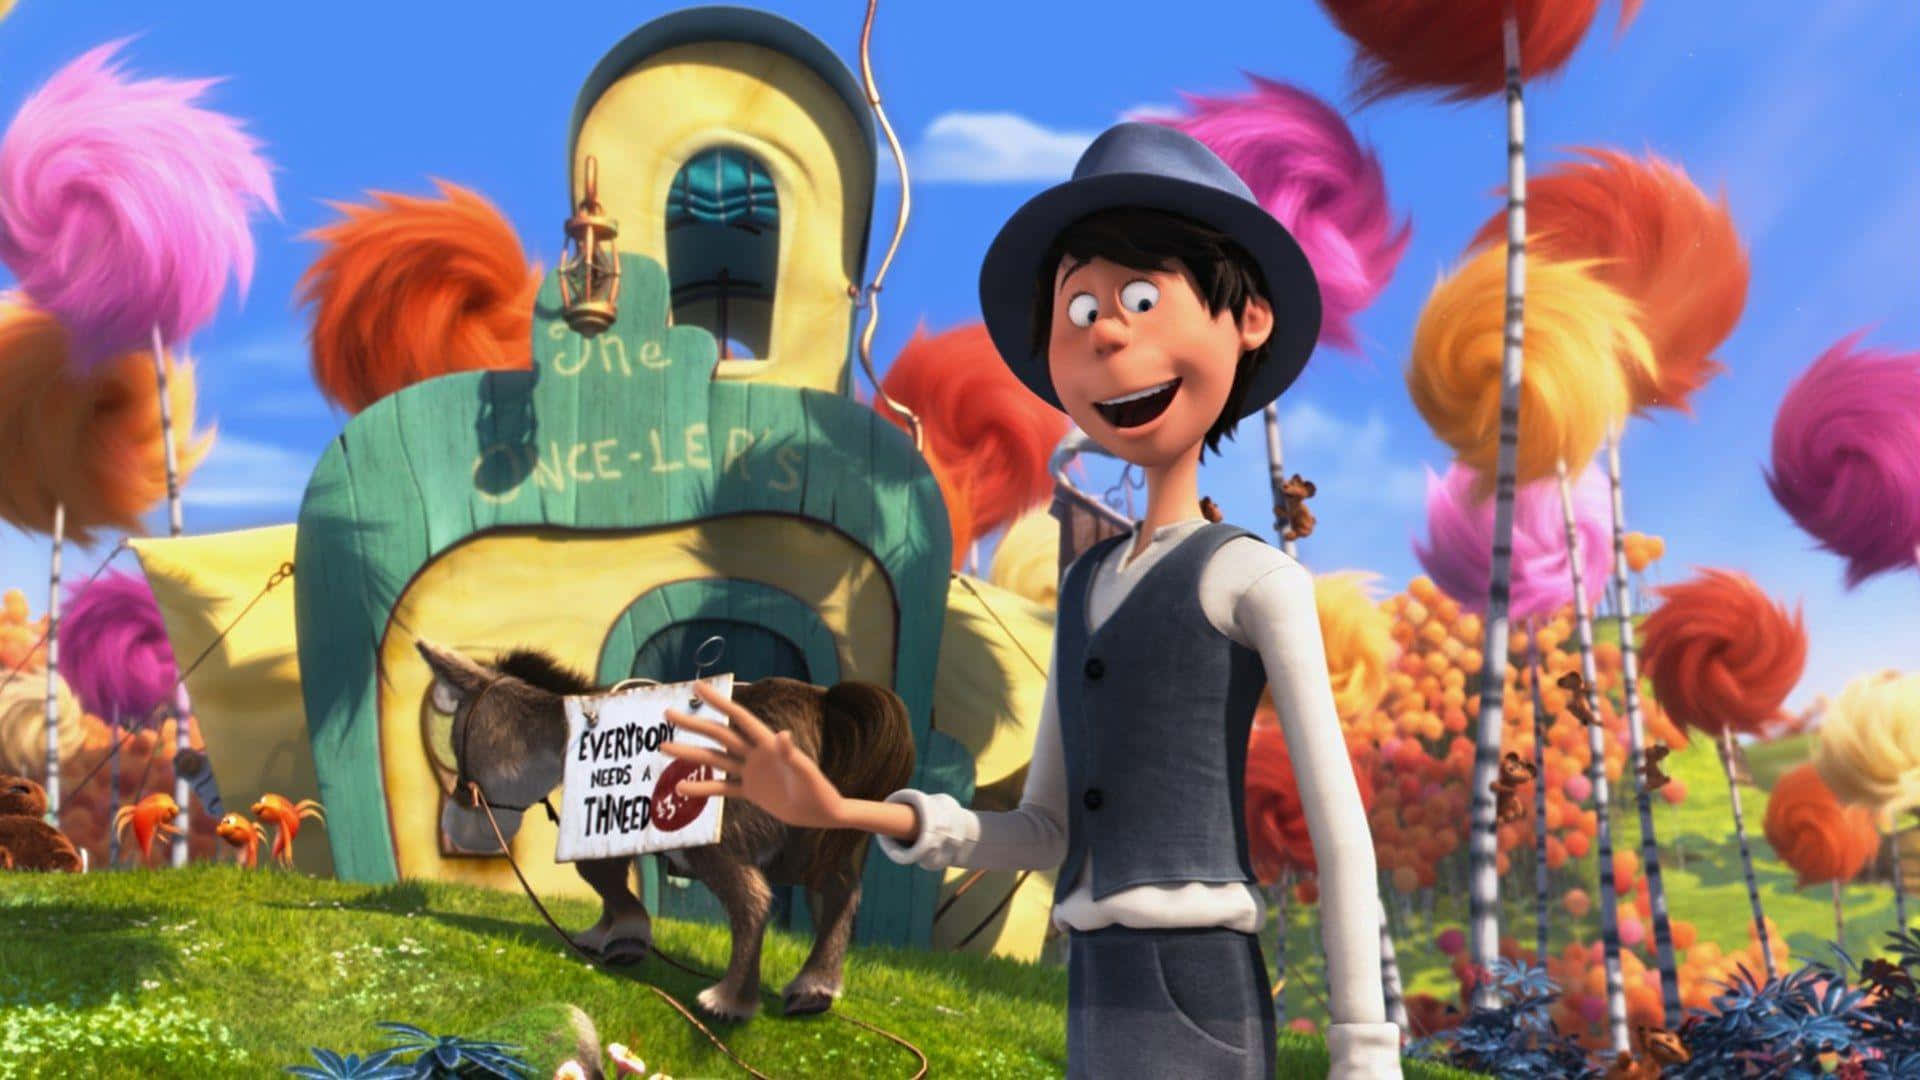 Lorax Character With Donkeyand Thneed Sign Background